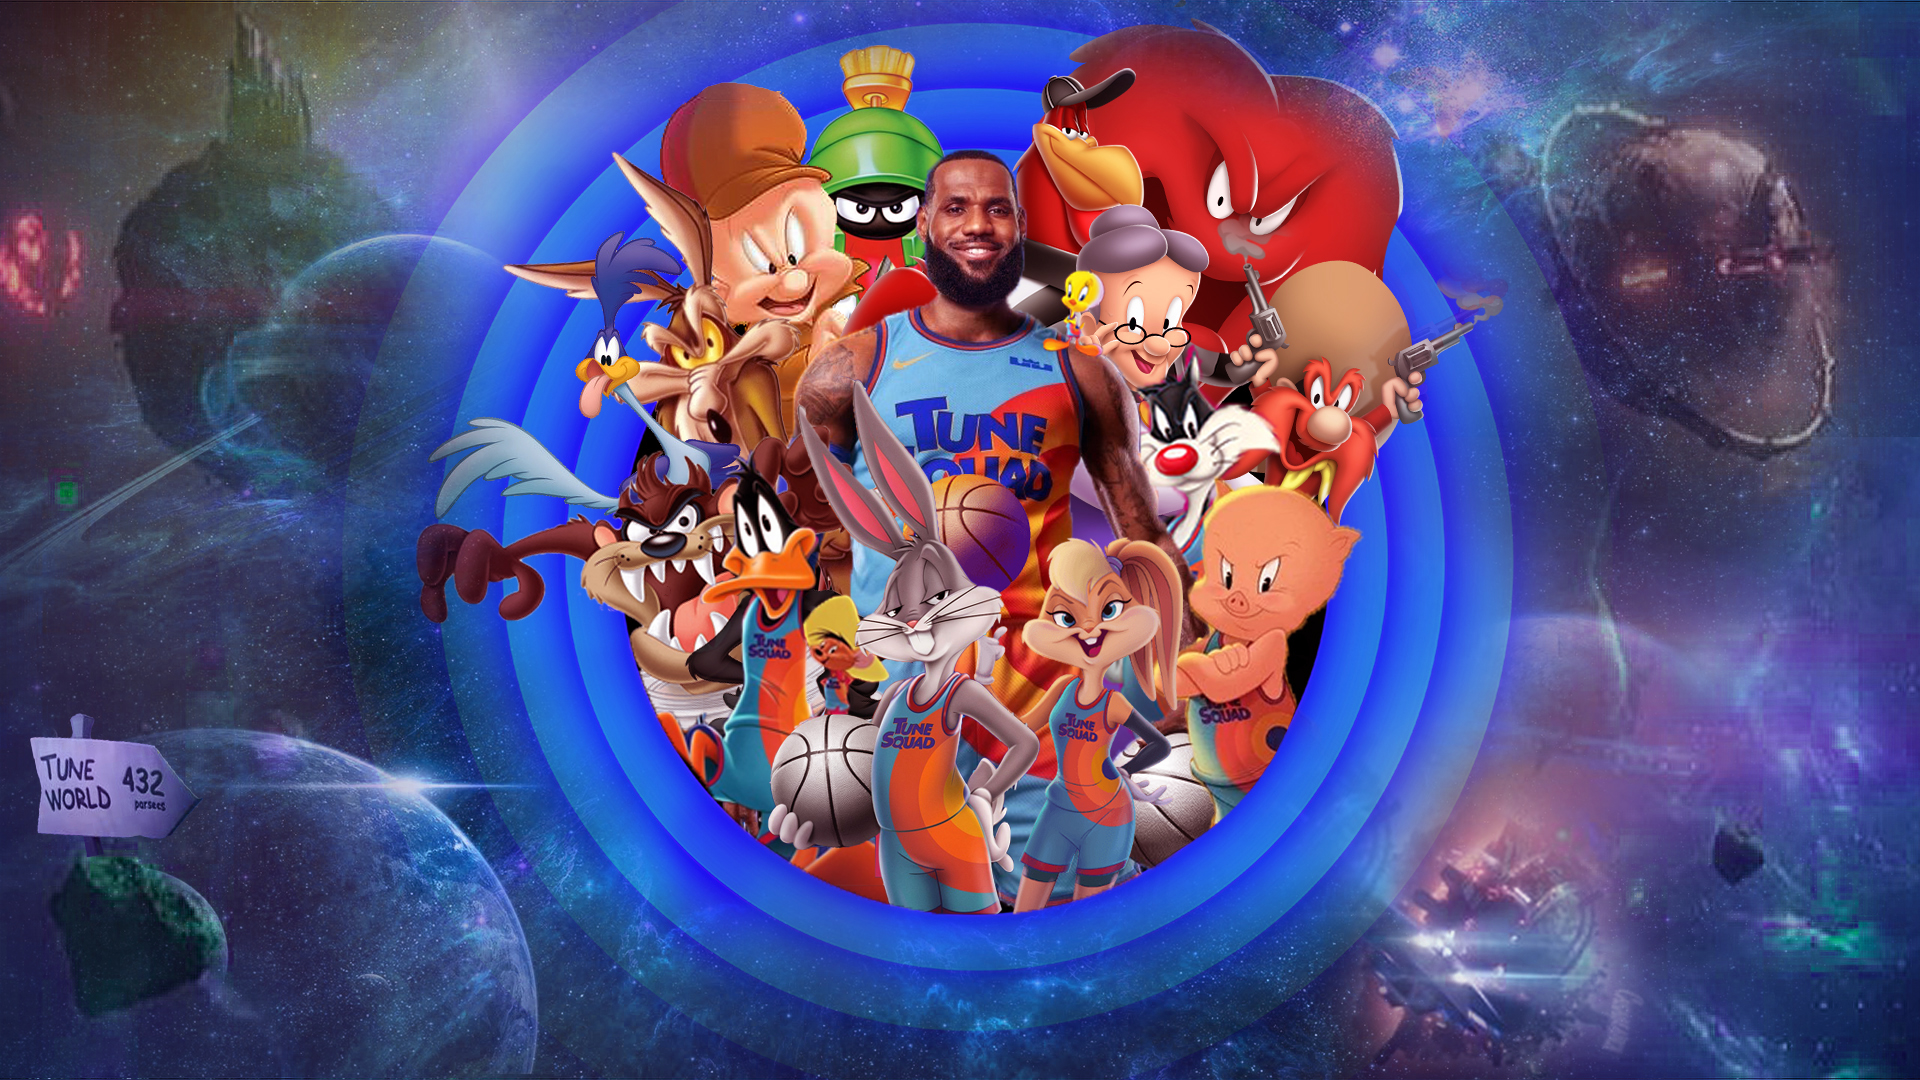 Space Jam A New Legacy Wallpaper By Thekingblader995 On Deviantart